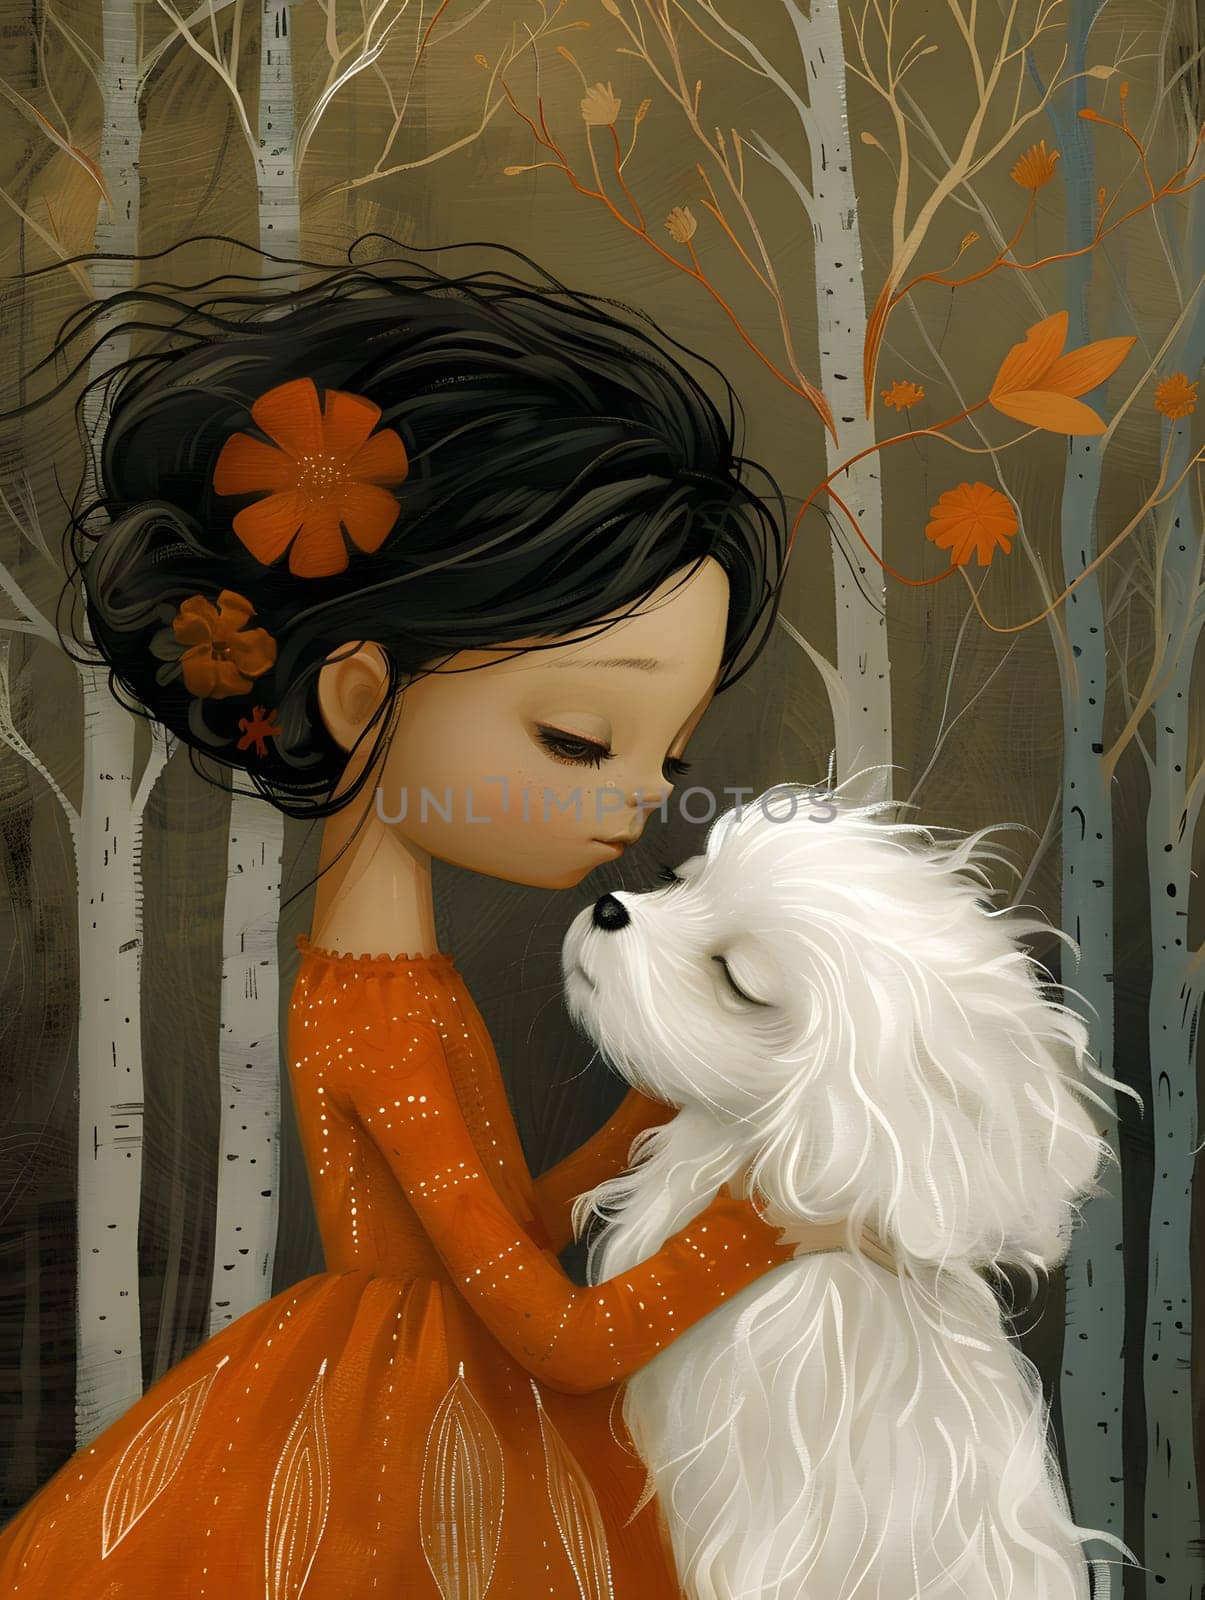 A girl with black hair in an orange dress hugs a white dog with a flower toy by Nadtochiy